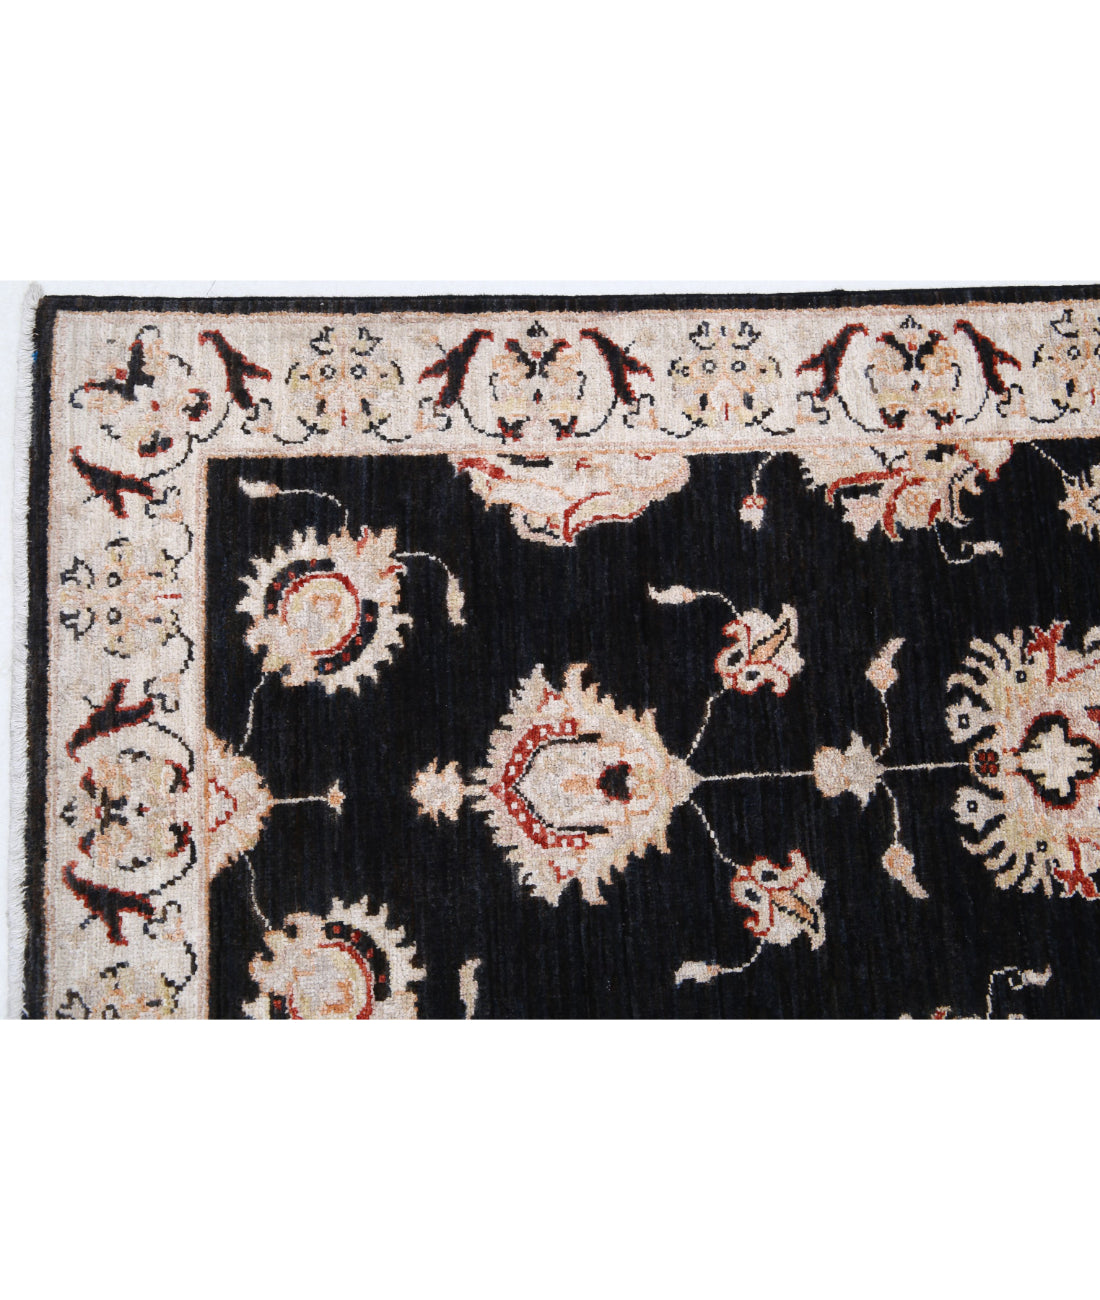 Ziegler 2'6'' X 8'8'' Hand-Knotted Wool Rug 2'6'' x 8'8'' (75 X 260) / Black / Ivory